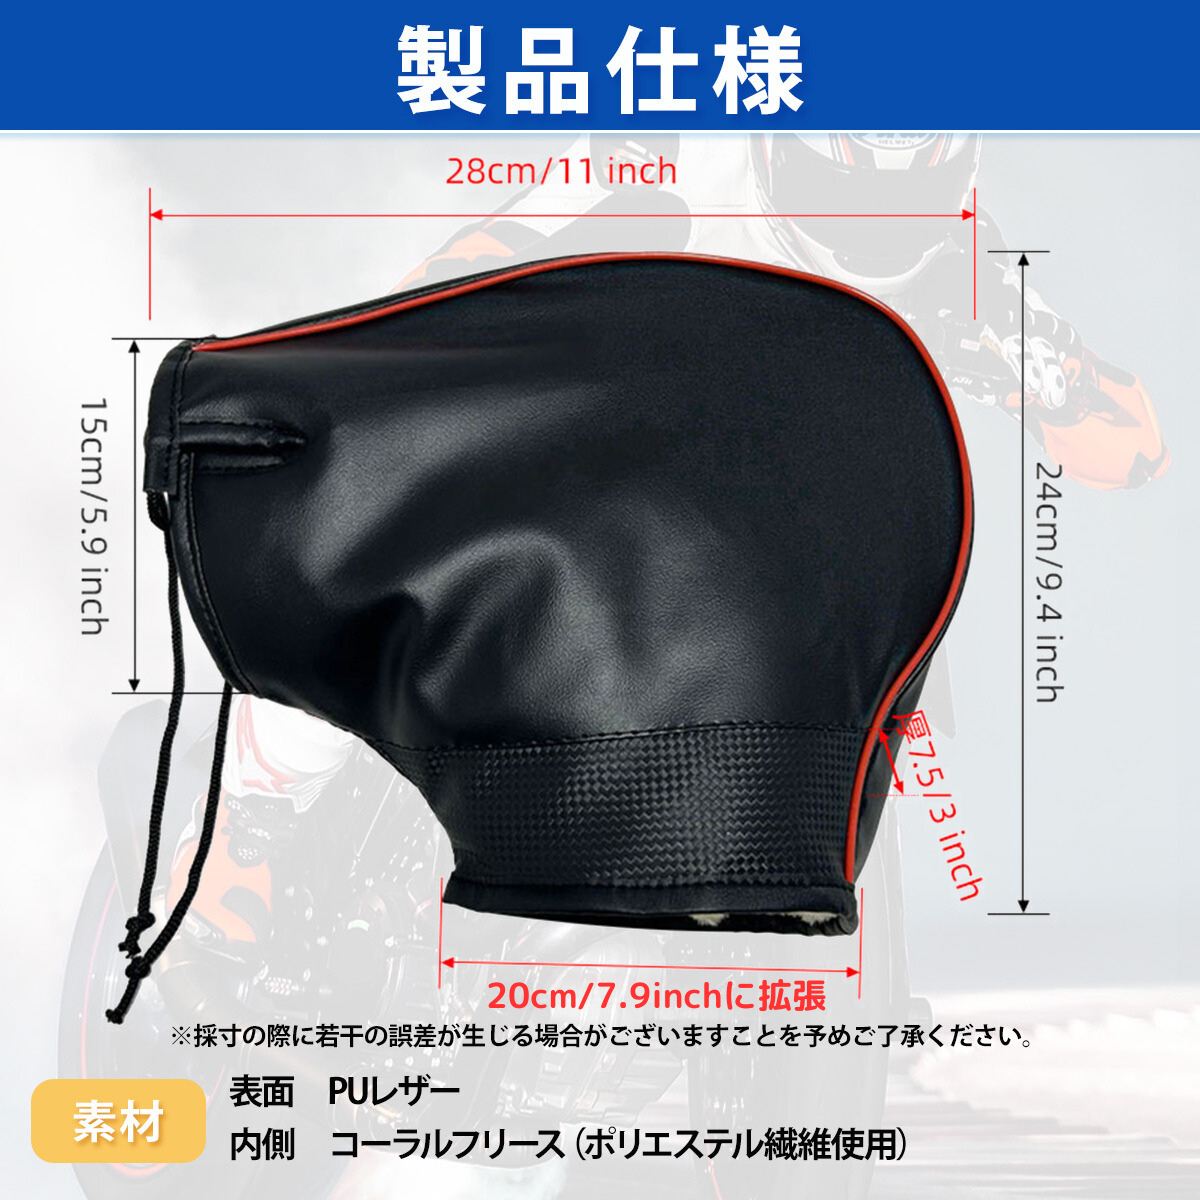  steering wheel cover bike bicycle motor-bike glove u- bar protection against cold . manner left right set protection heat insulation autumn winter 